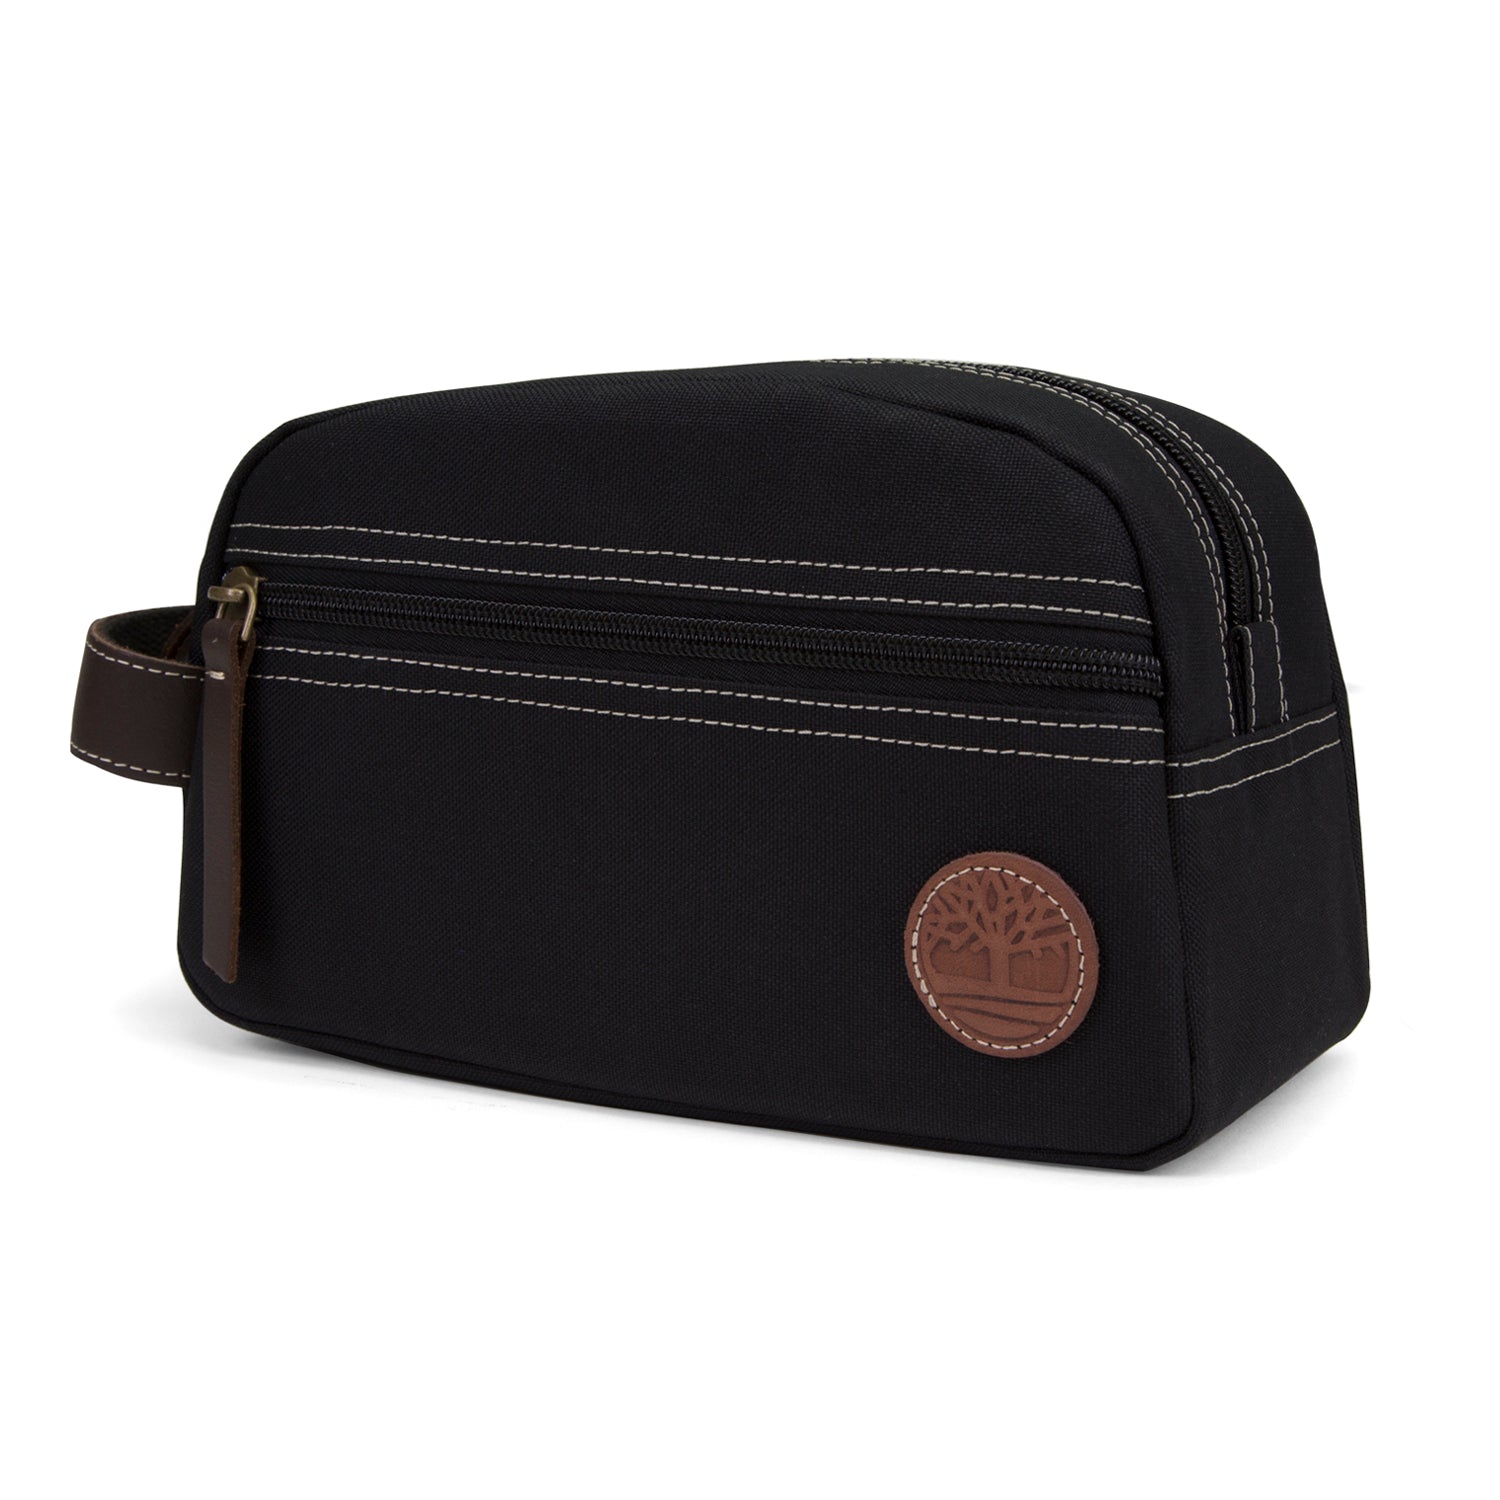 Black Timberland travel kit with side handle, zip top closure and exterior zipped front pocket